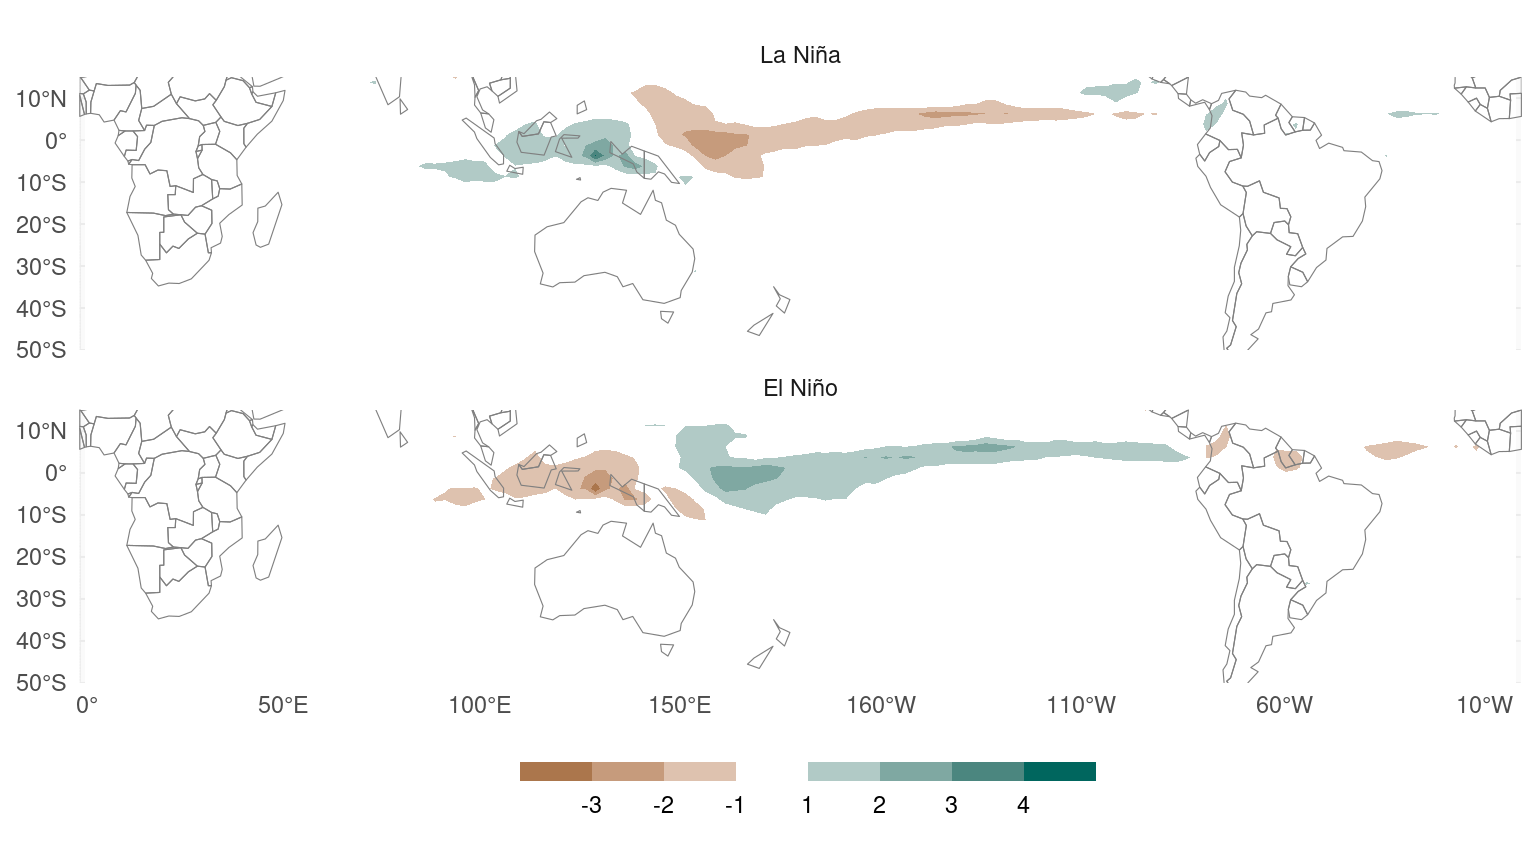 Maps of the Southern Hemisphere (10ºN to 50ºS) with filled contours. The patterns of contours are similar to the first figure. This time the values for both panels are much lower in general and equal in magnitude between them.